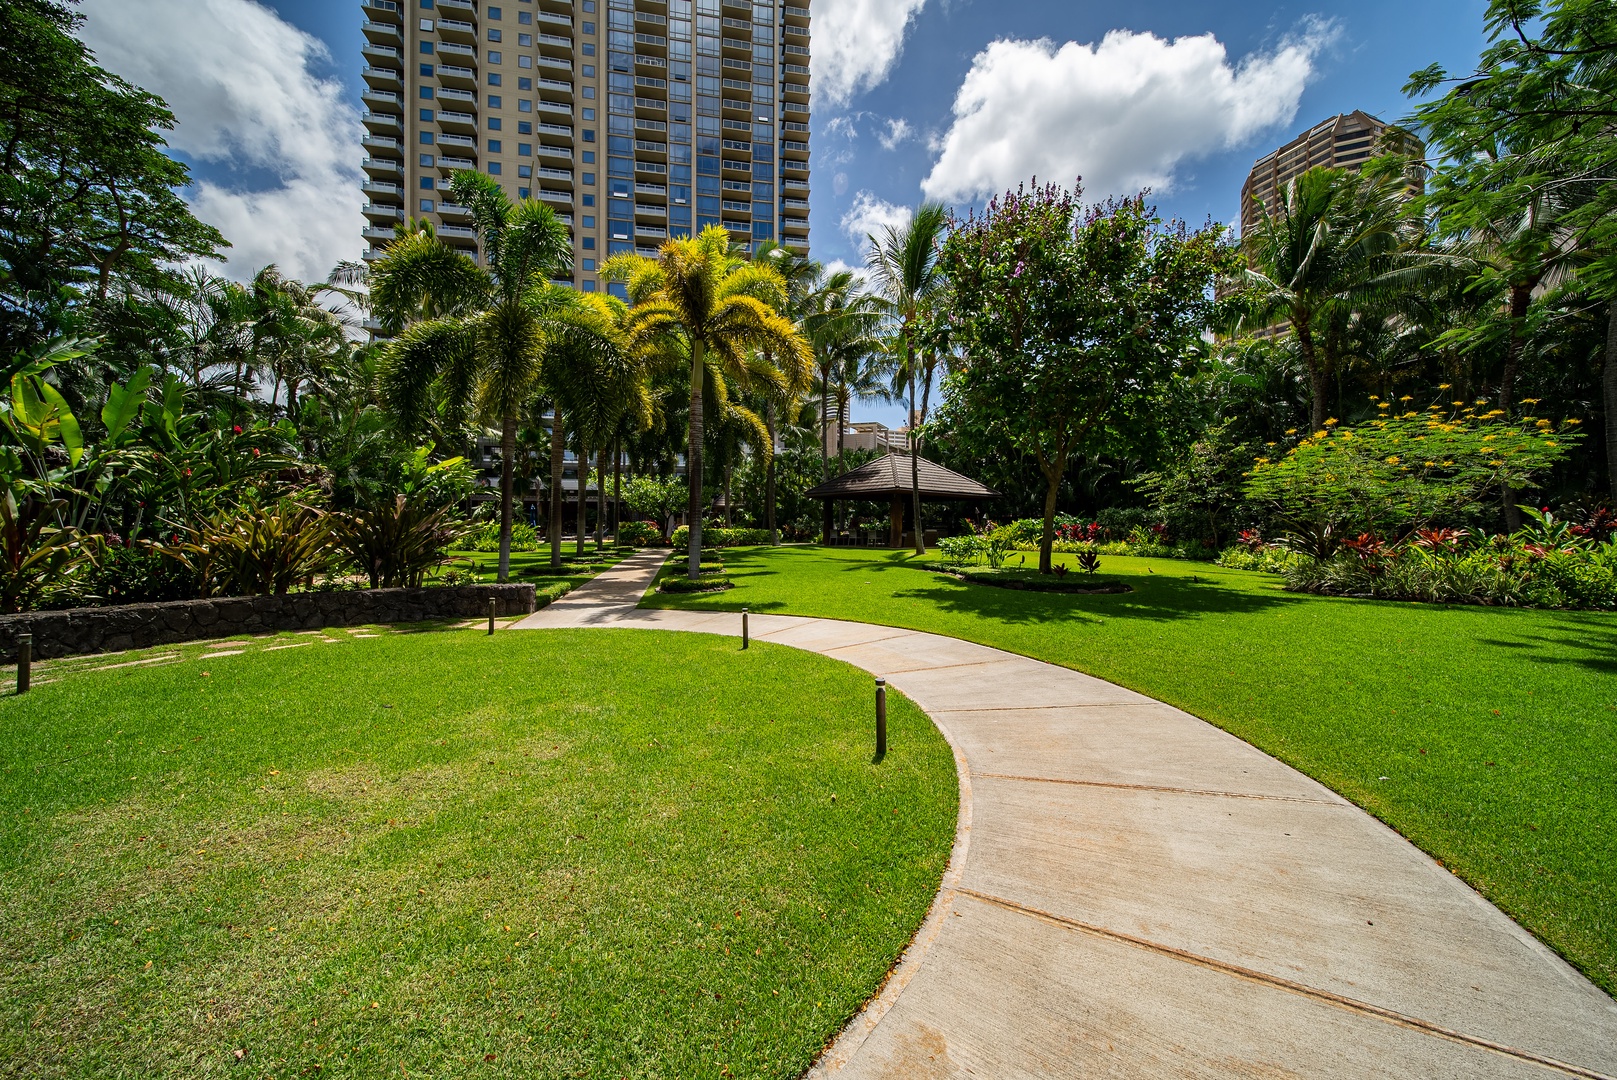 Honolulu Vacation Rentals, Watermark Waikiki Unit 901 - The lush green surrounding is a plus for a relaxing stay.